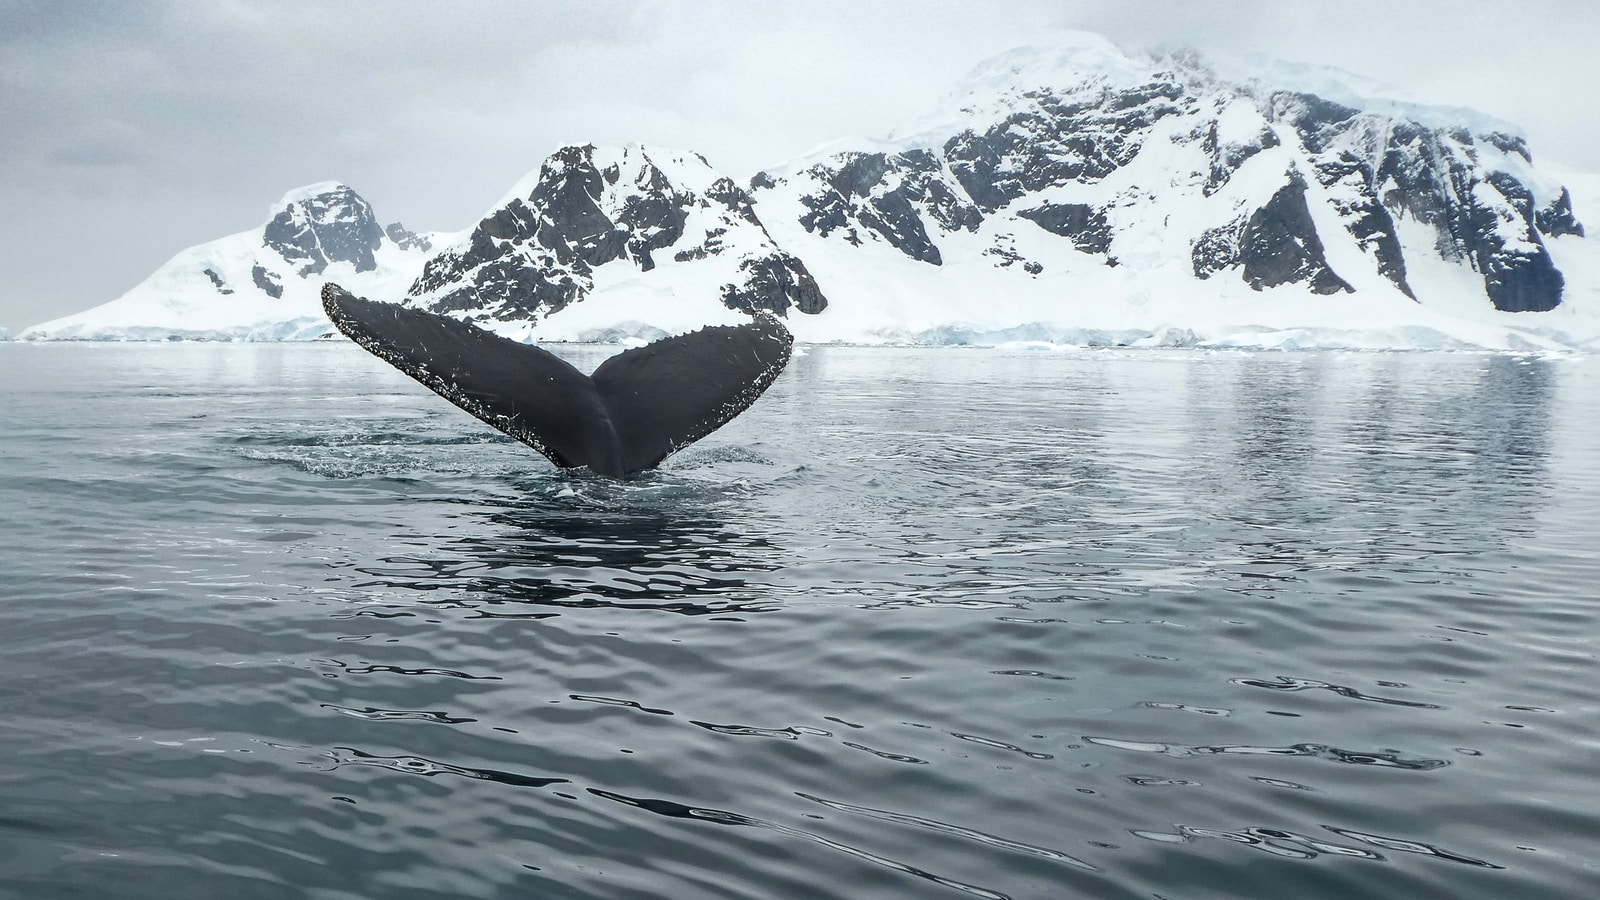 view of whale's tail at the body of water